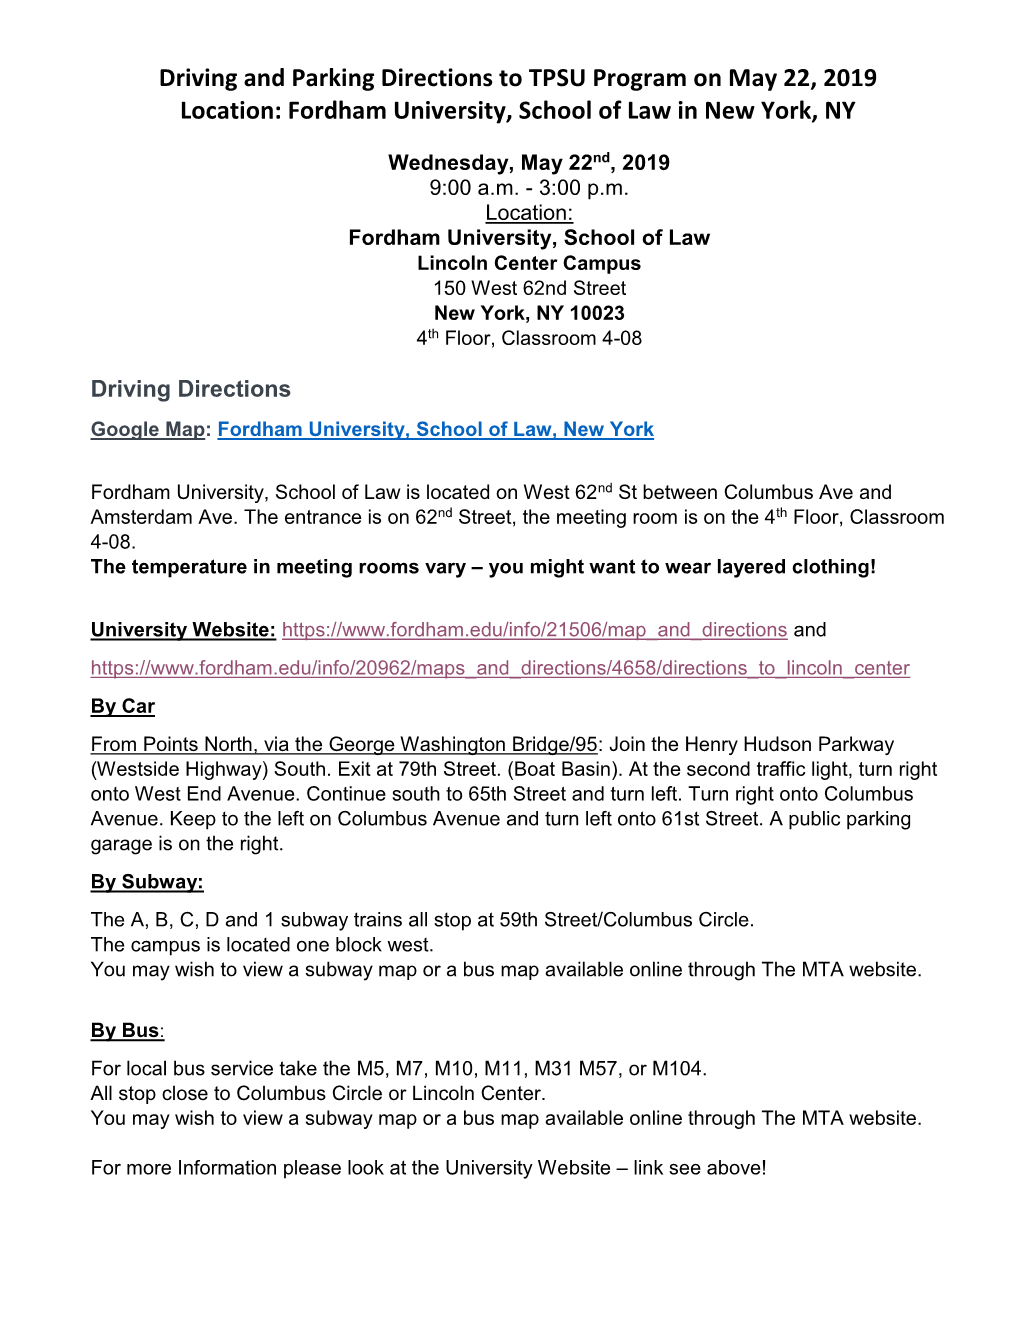 Driving and Parking Directions to TPSU Program on May 22, 2019 Location: Fordham University, School of Law in New York, NY